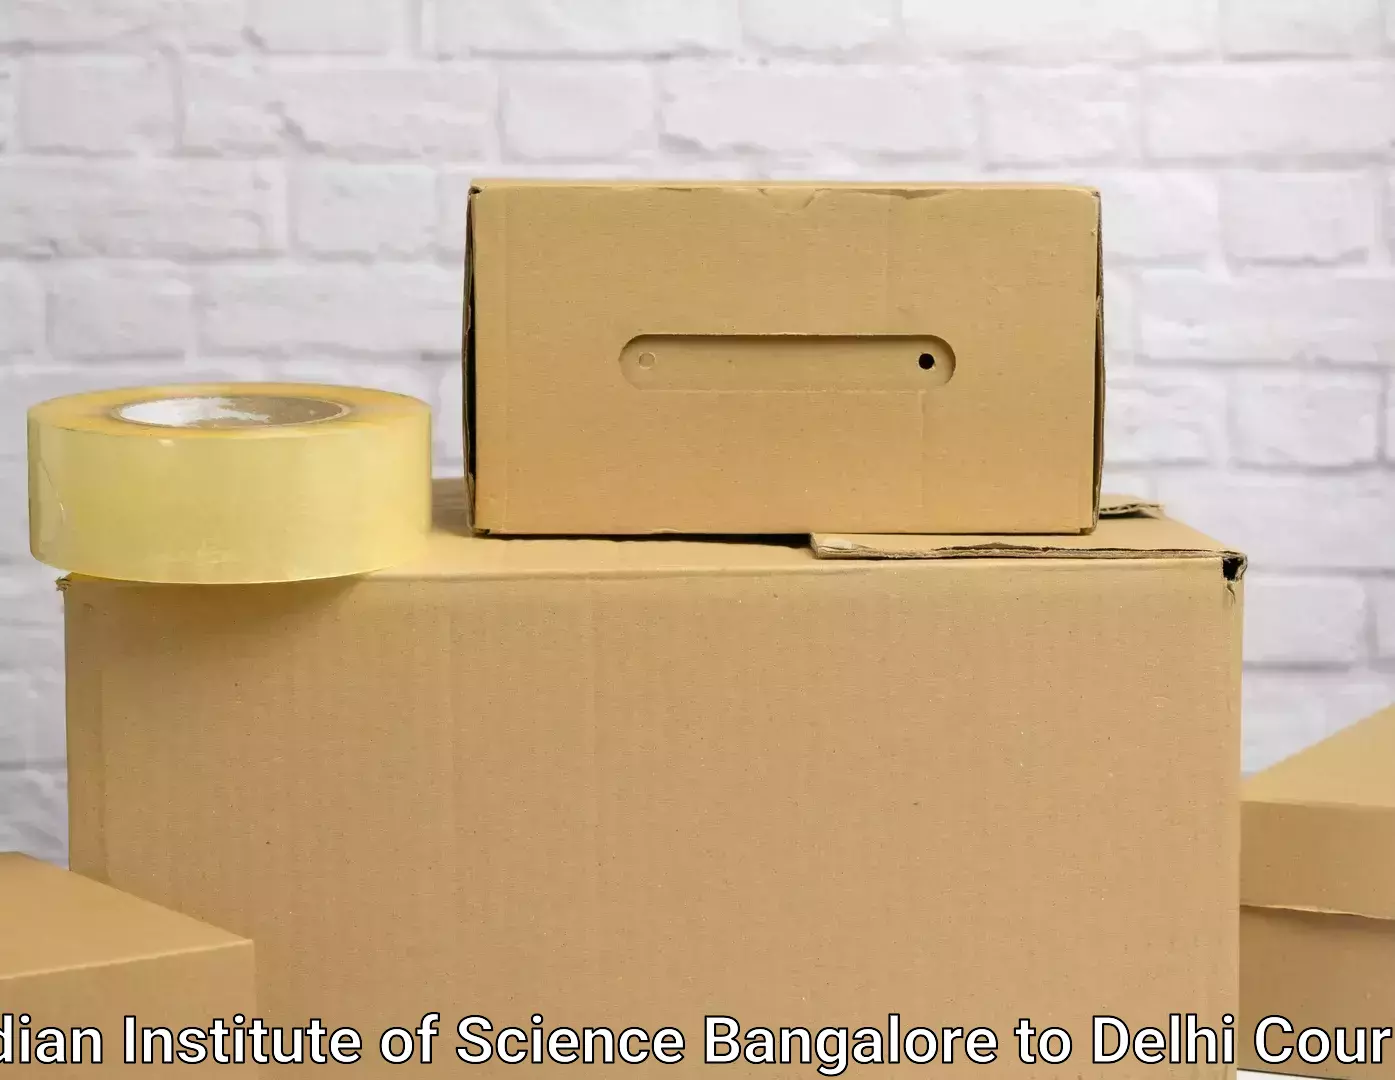 Seamless moving process in Indian Institute of Science Bangalore to Delhi